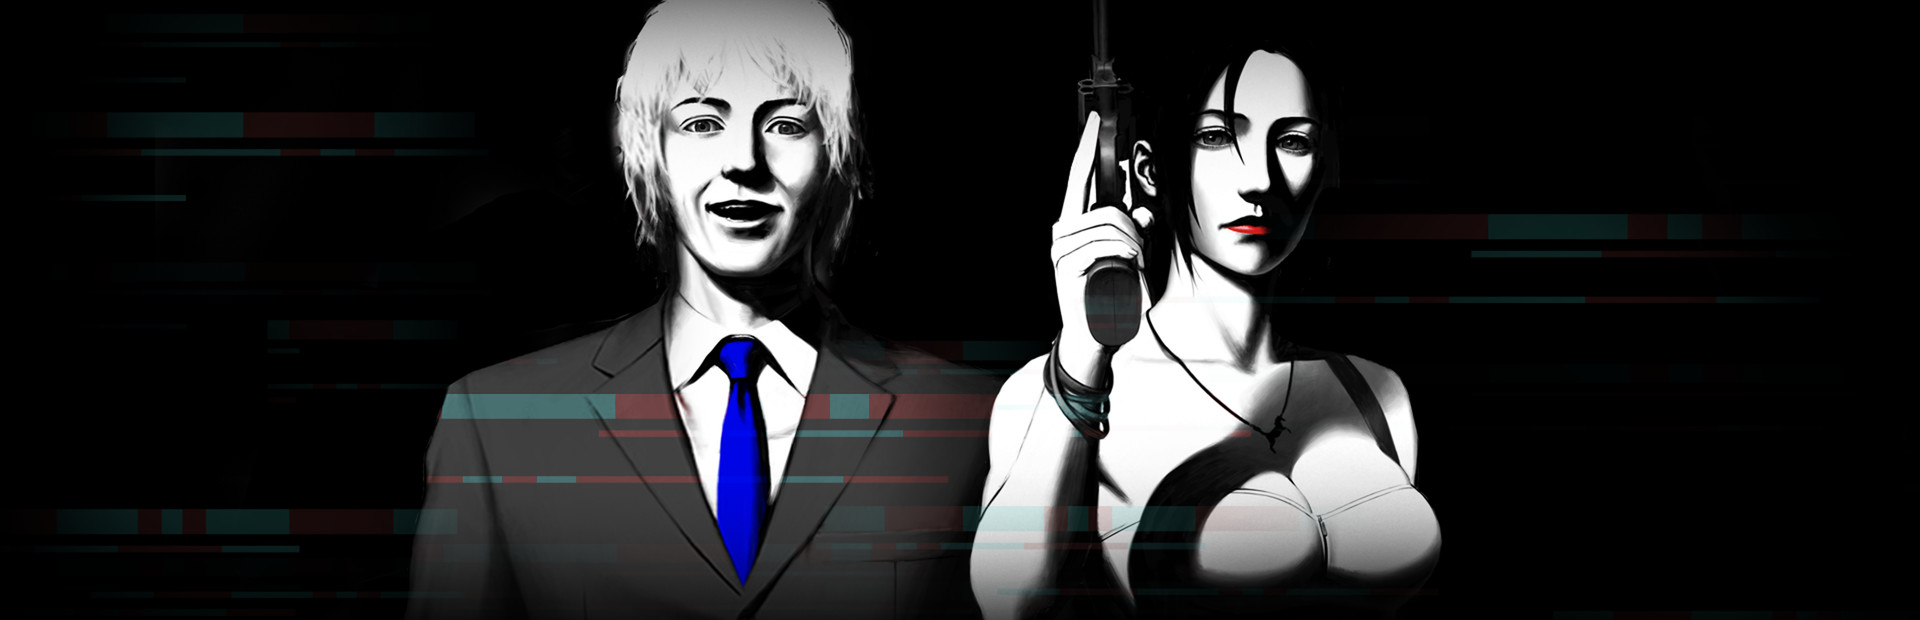 The 25th Ward: The Silver Case cover image